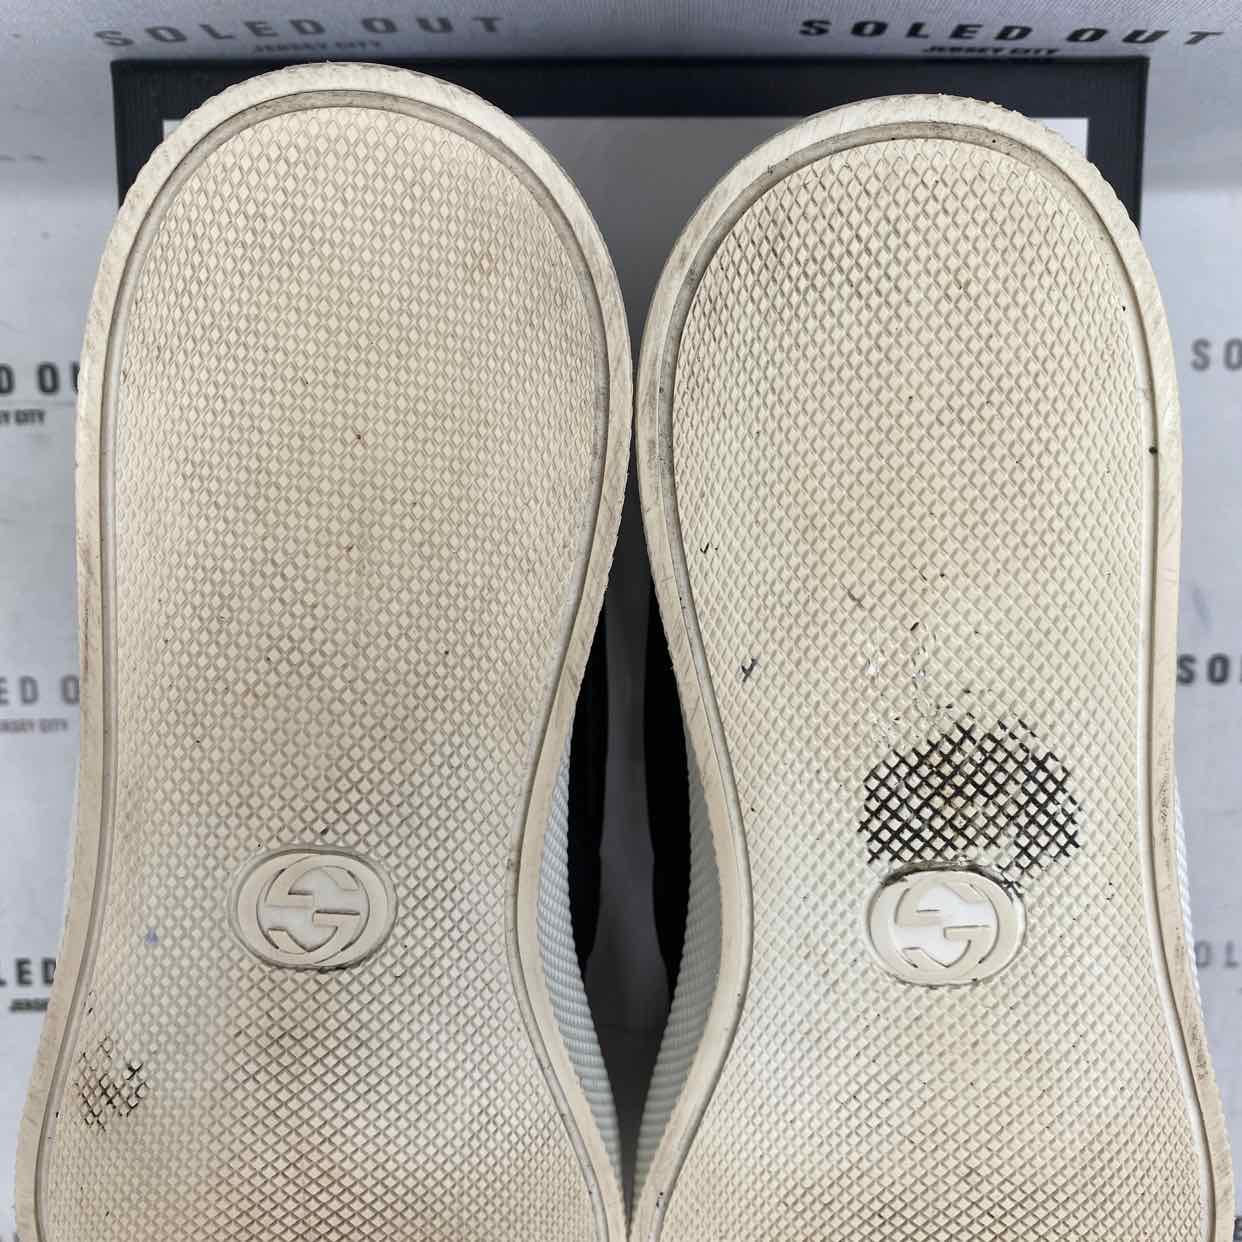 Gucci Slip-on &quot;Worldwide&quot;  Used Size 8G